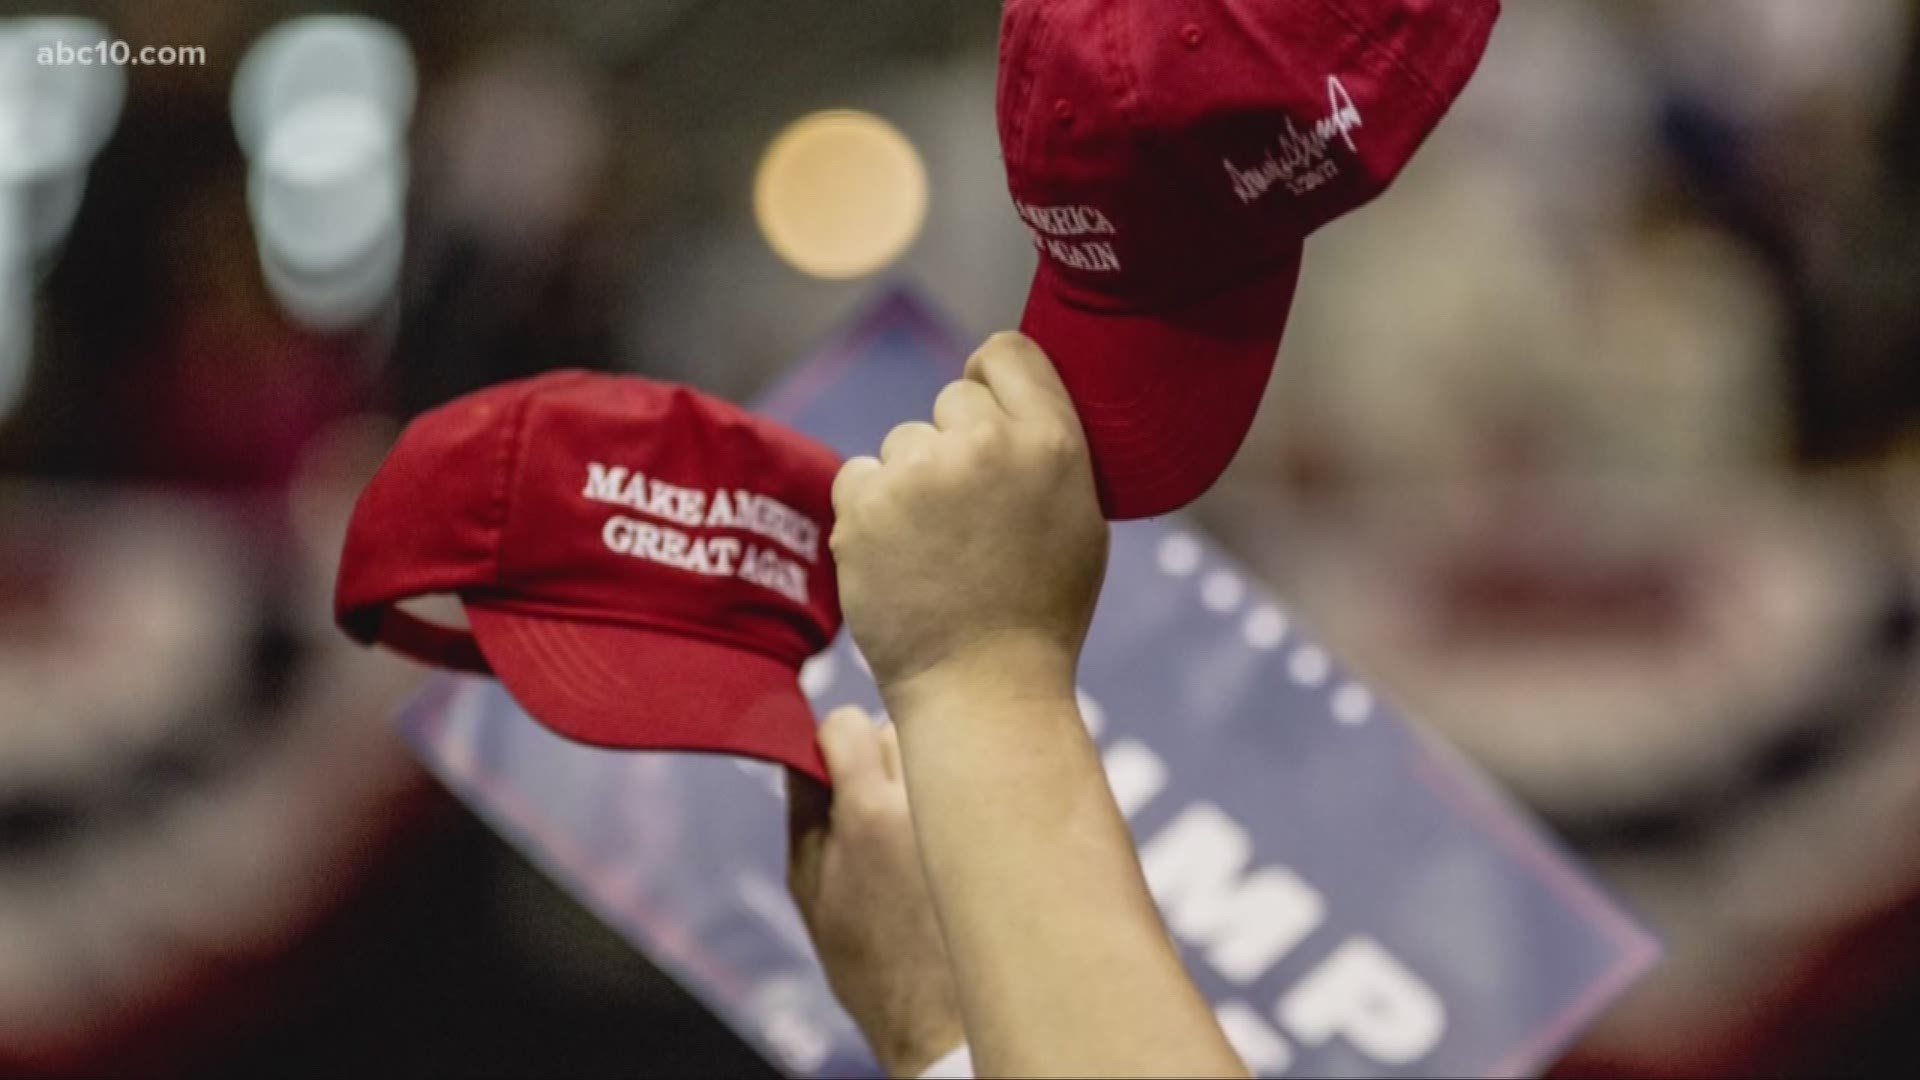 A high school student was arrested after snatching a classmates "Make America Great Again" hat and throwing it to the ground - twice. 